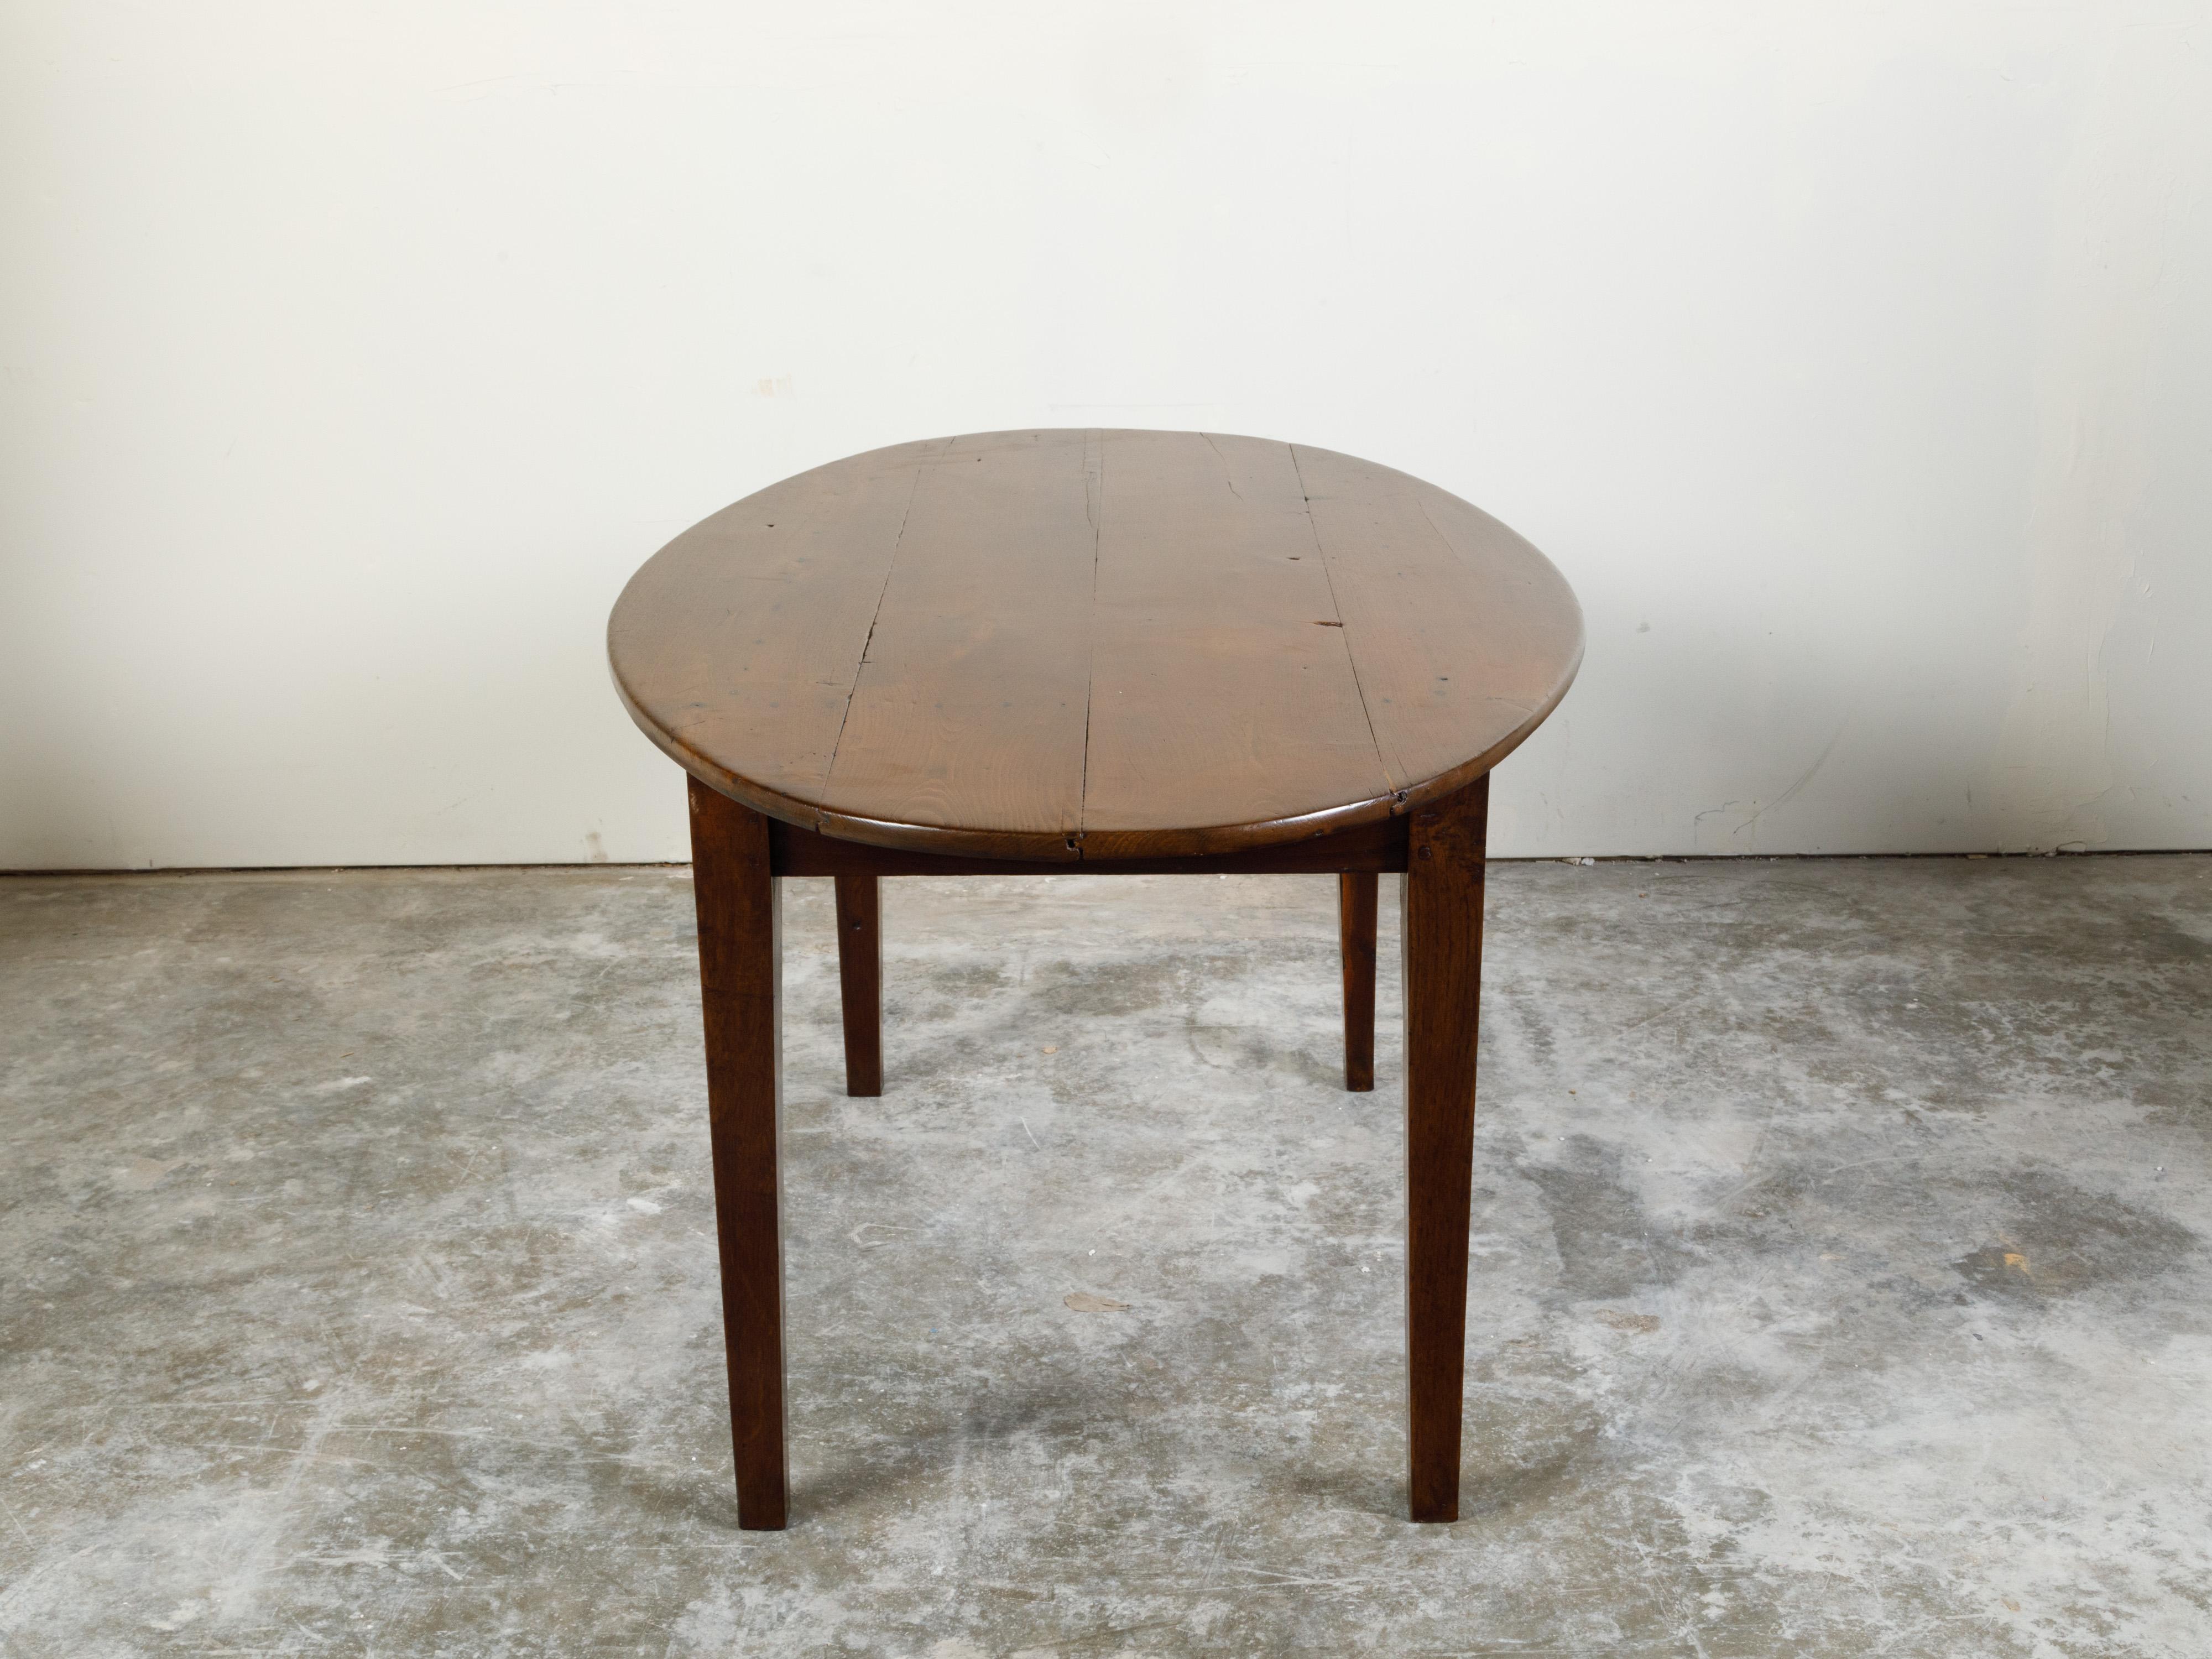 English 19th Century Walnut Table with Oval Top, Tapered Legs and Dark Patina For Sale 5